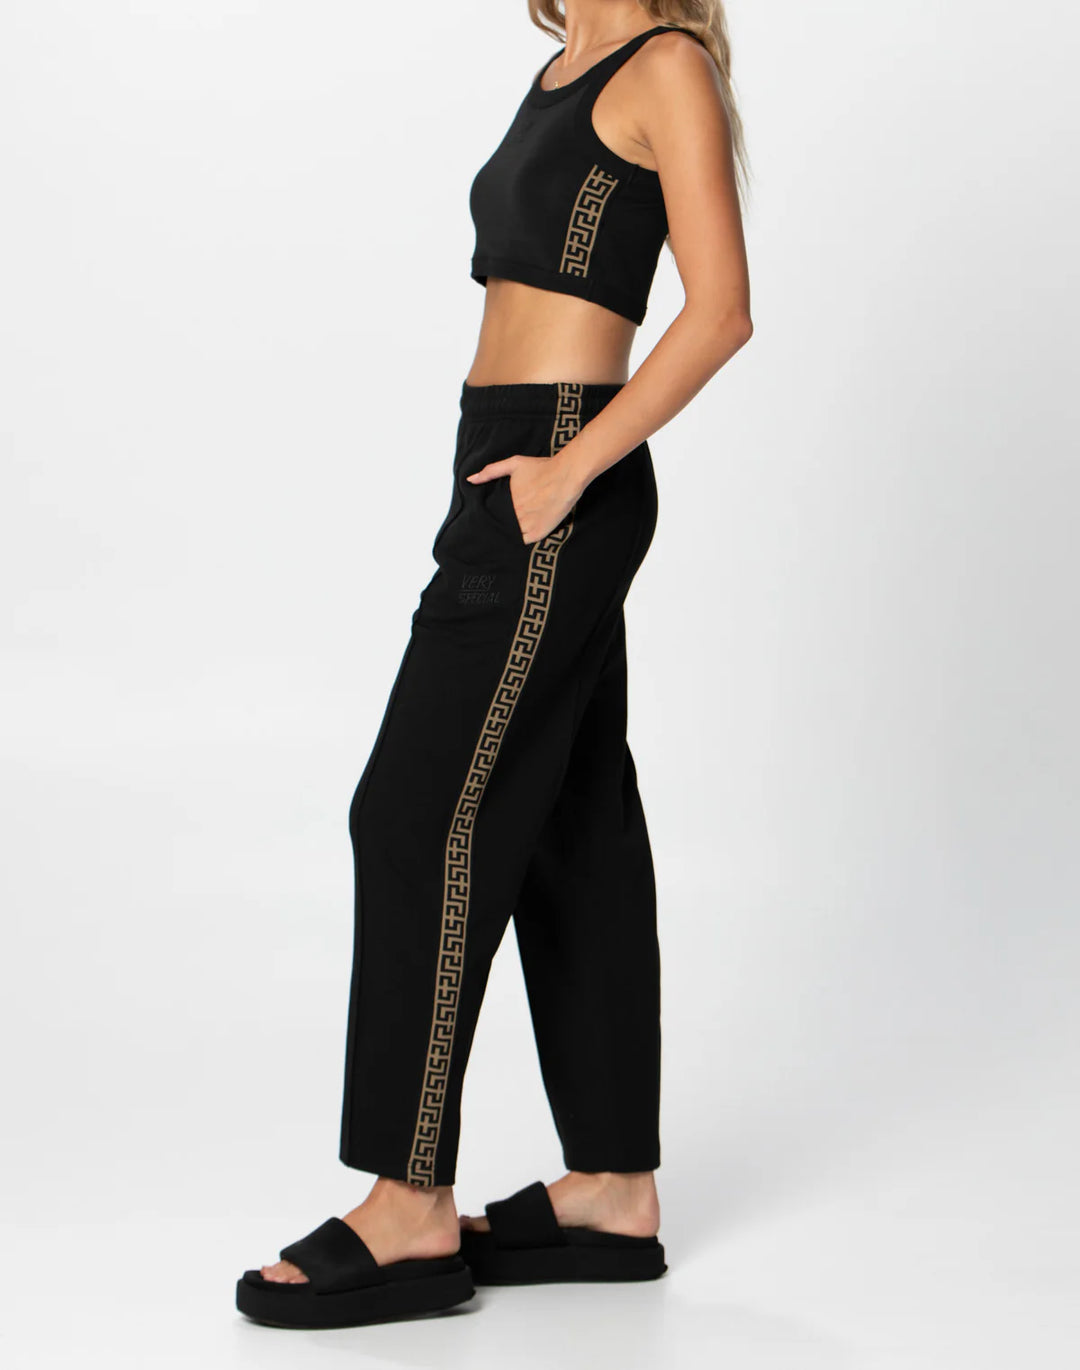 Something Very Special - Geo Track Pants 3.0 - Black Gold